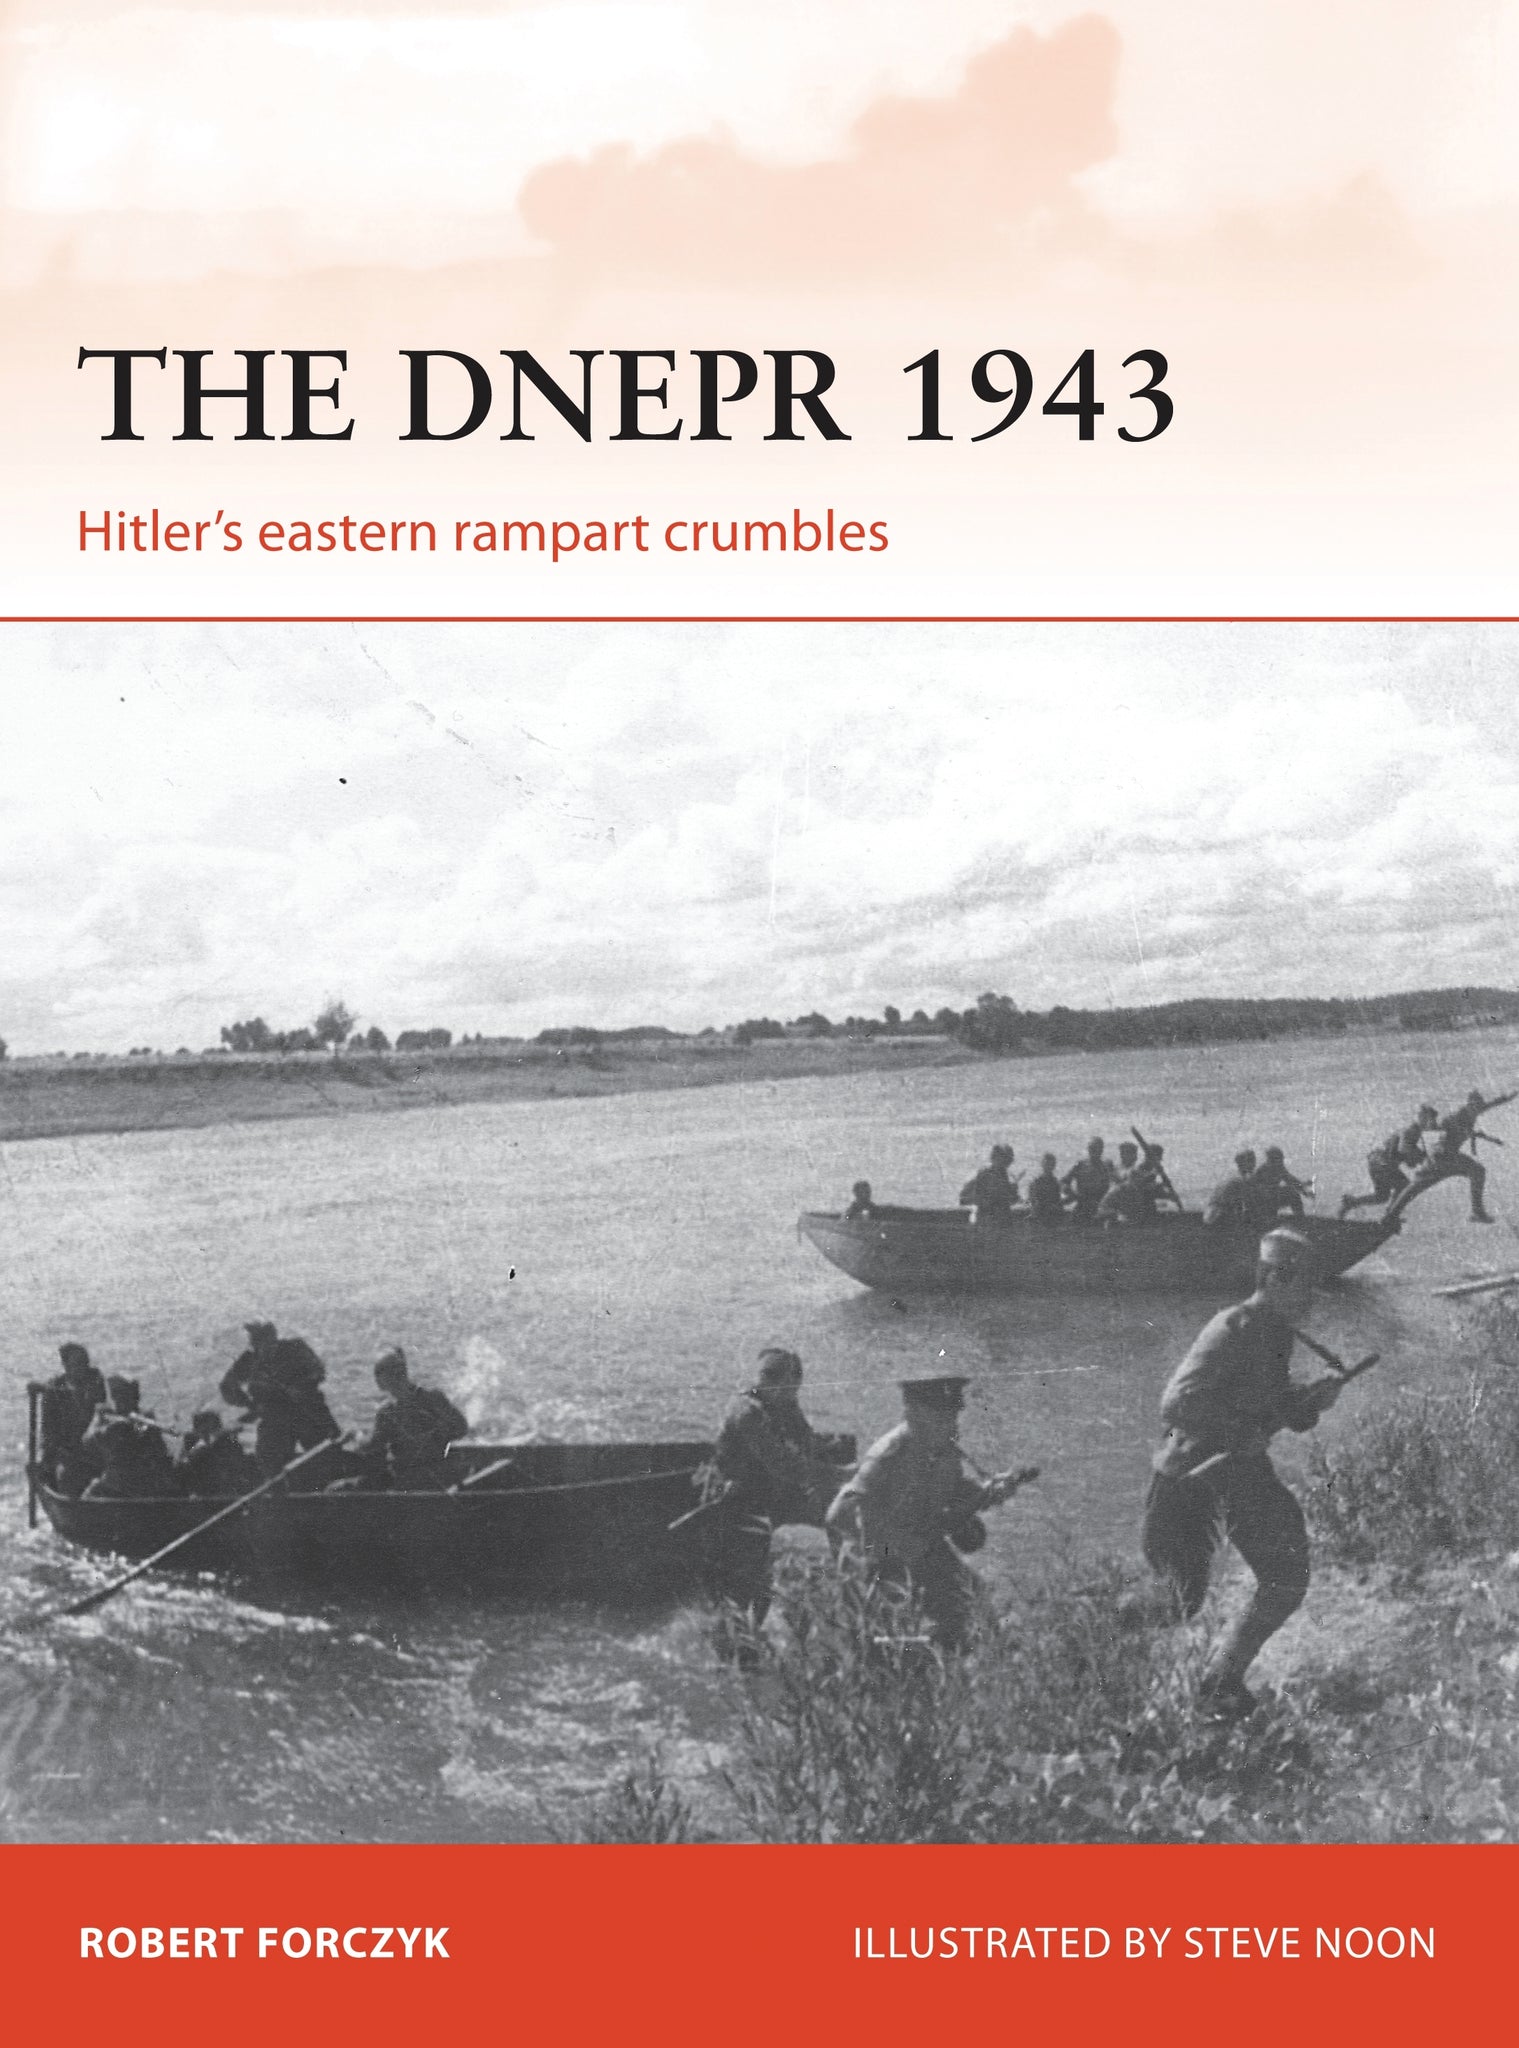 The Dnepr 1943 : Hitler's eastern rampart crumbles